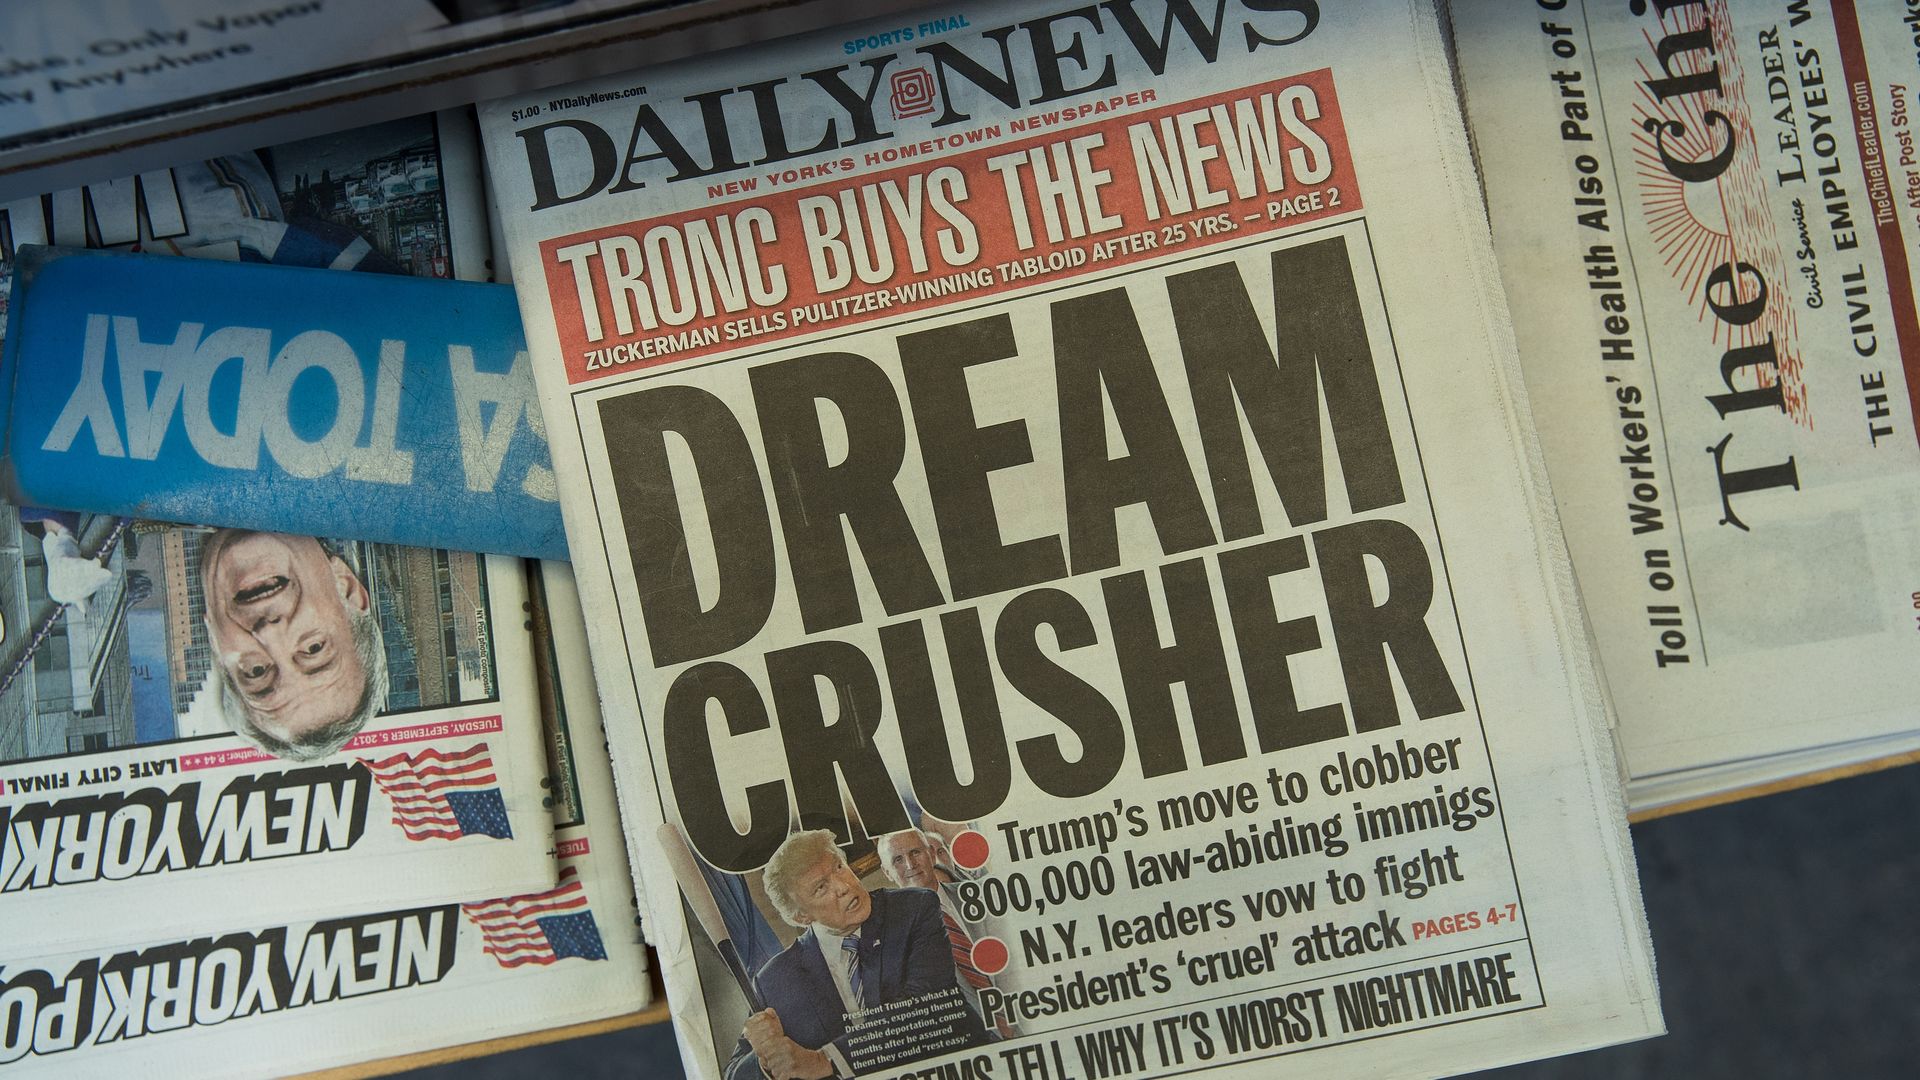 The New York Daily News